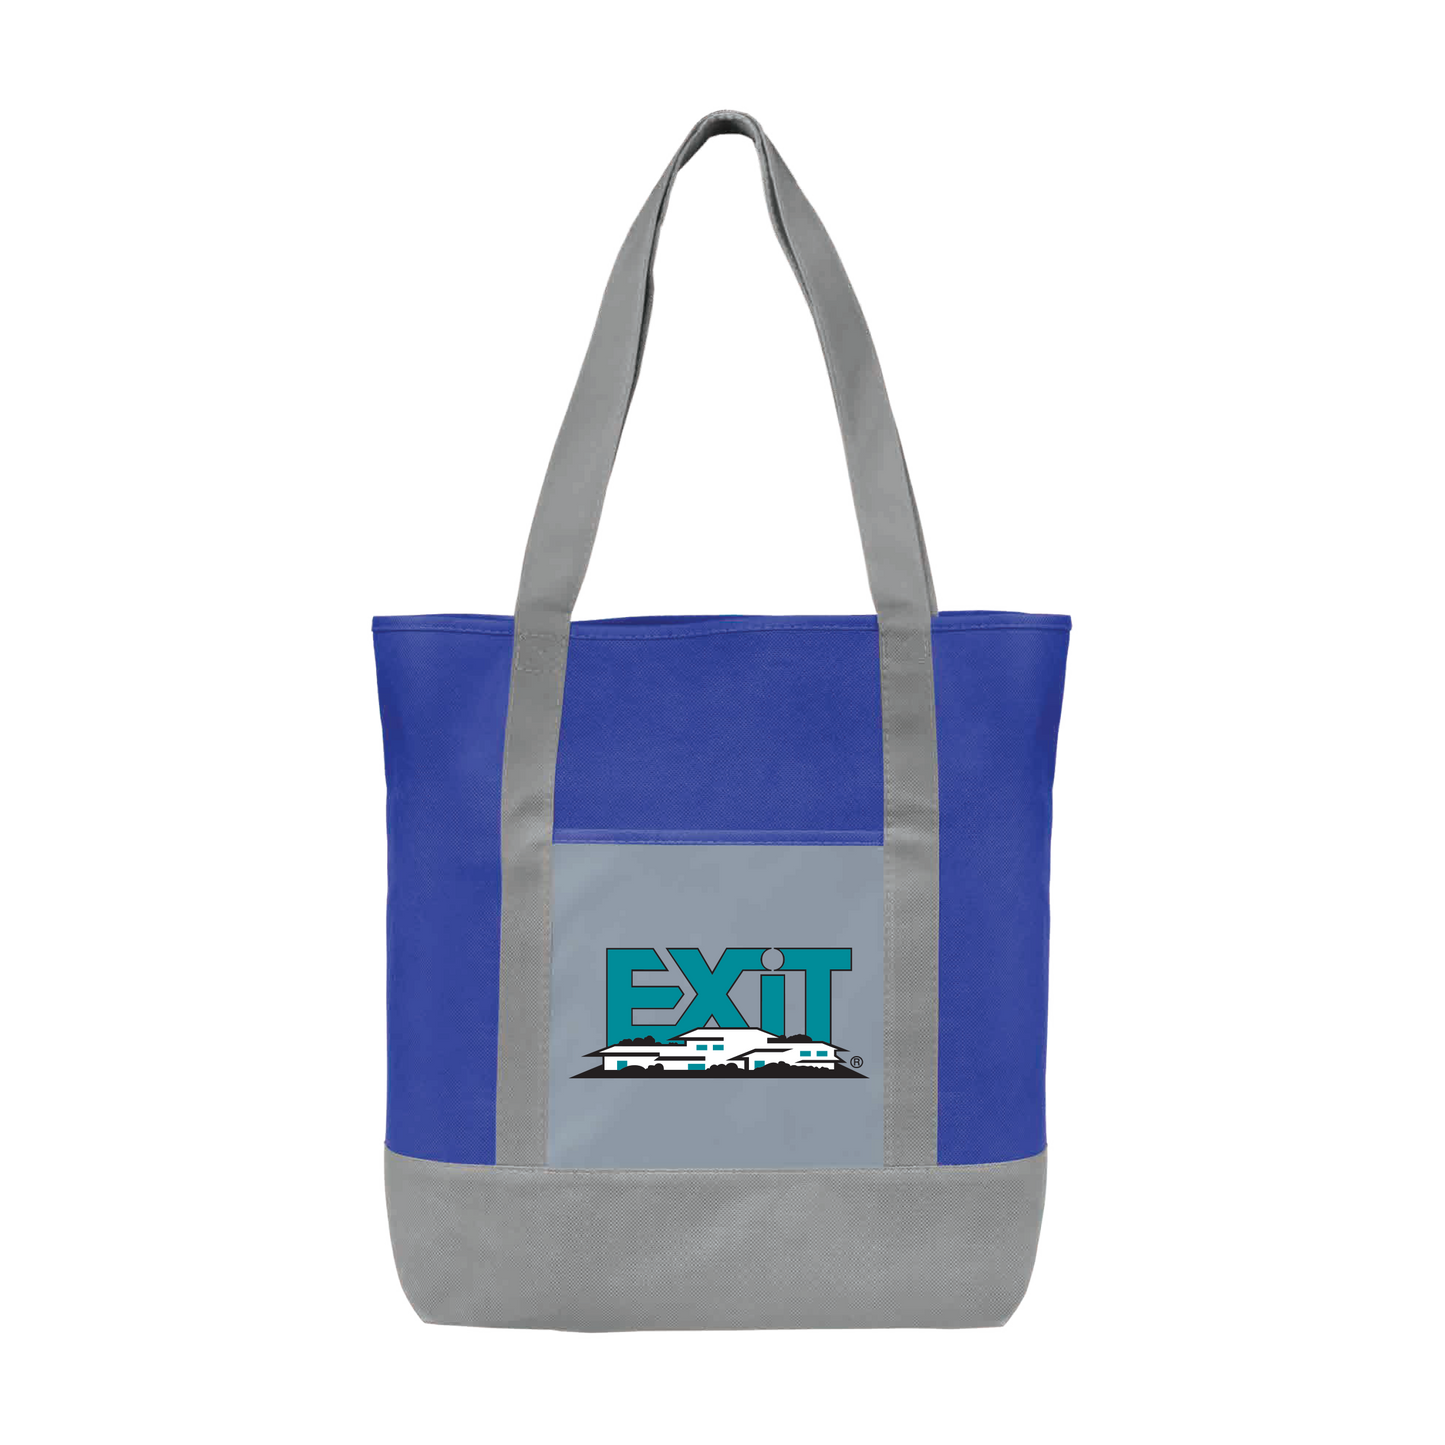 Glenwood - Non-Woven Tote Bag with 210D Pocket - ColorJet